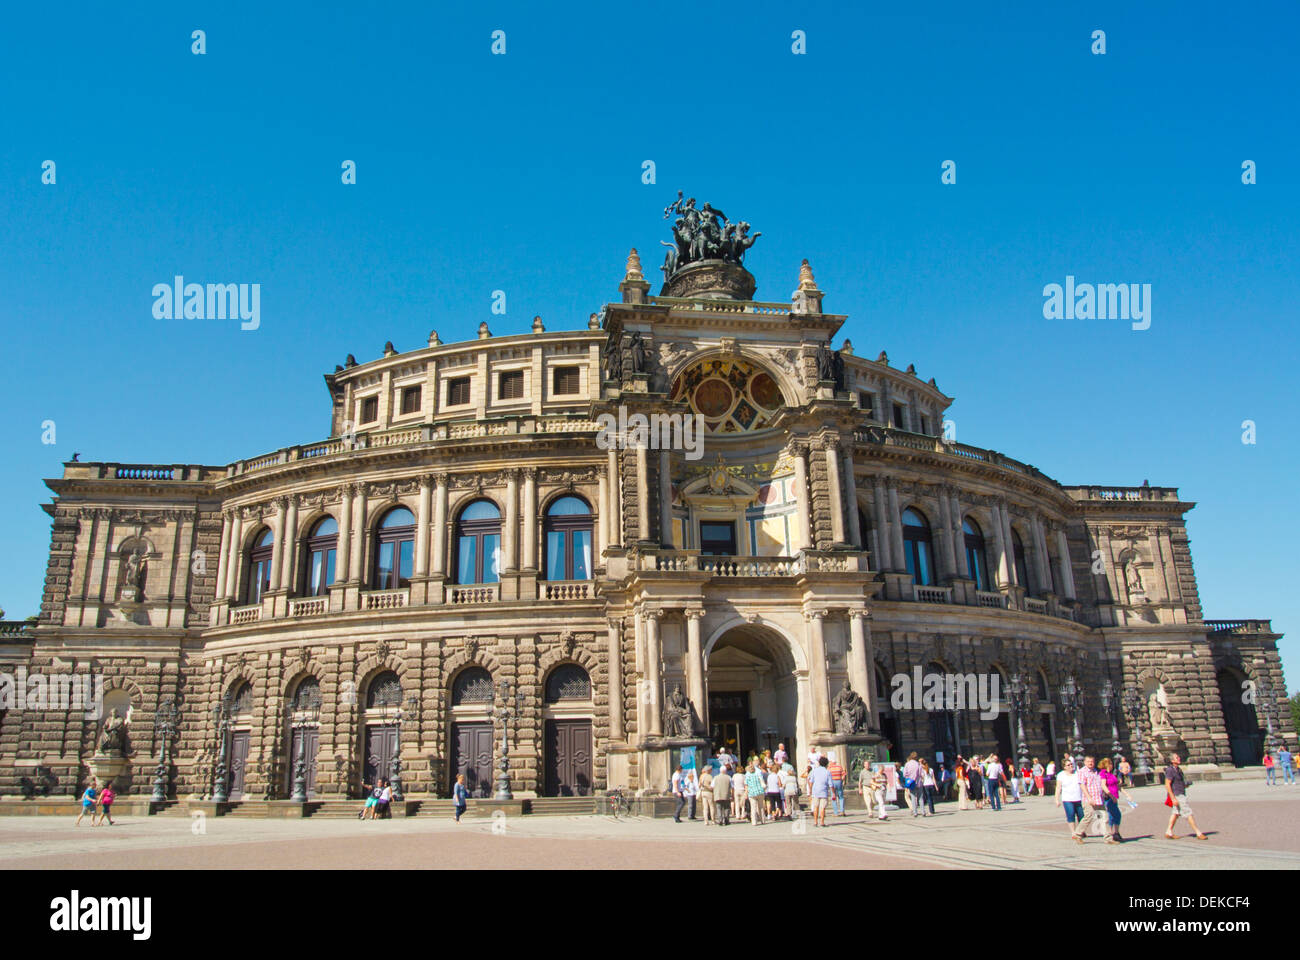 Semperoper opera house at Theaterplatz square Altstadt the old town Dresden city Saxony state eastern Germany central Europe Stock Photo